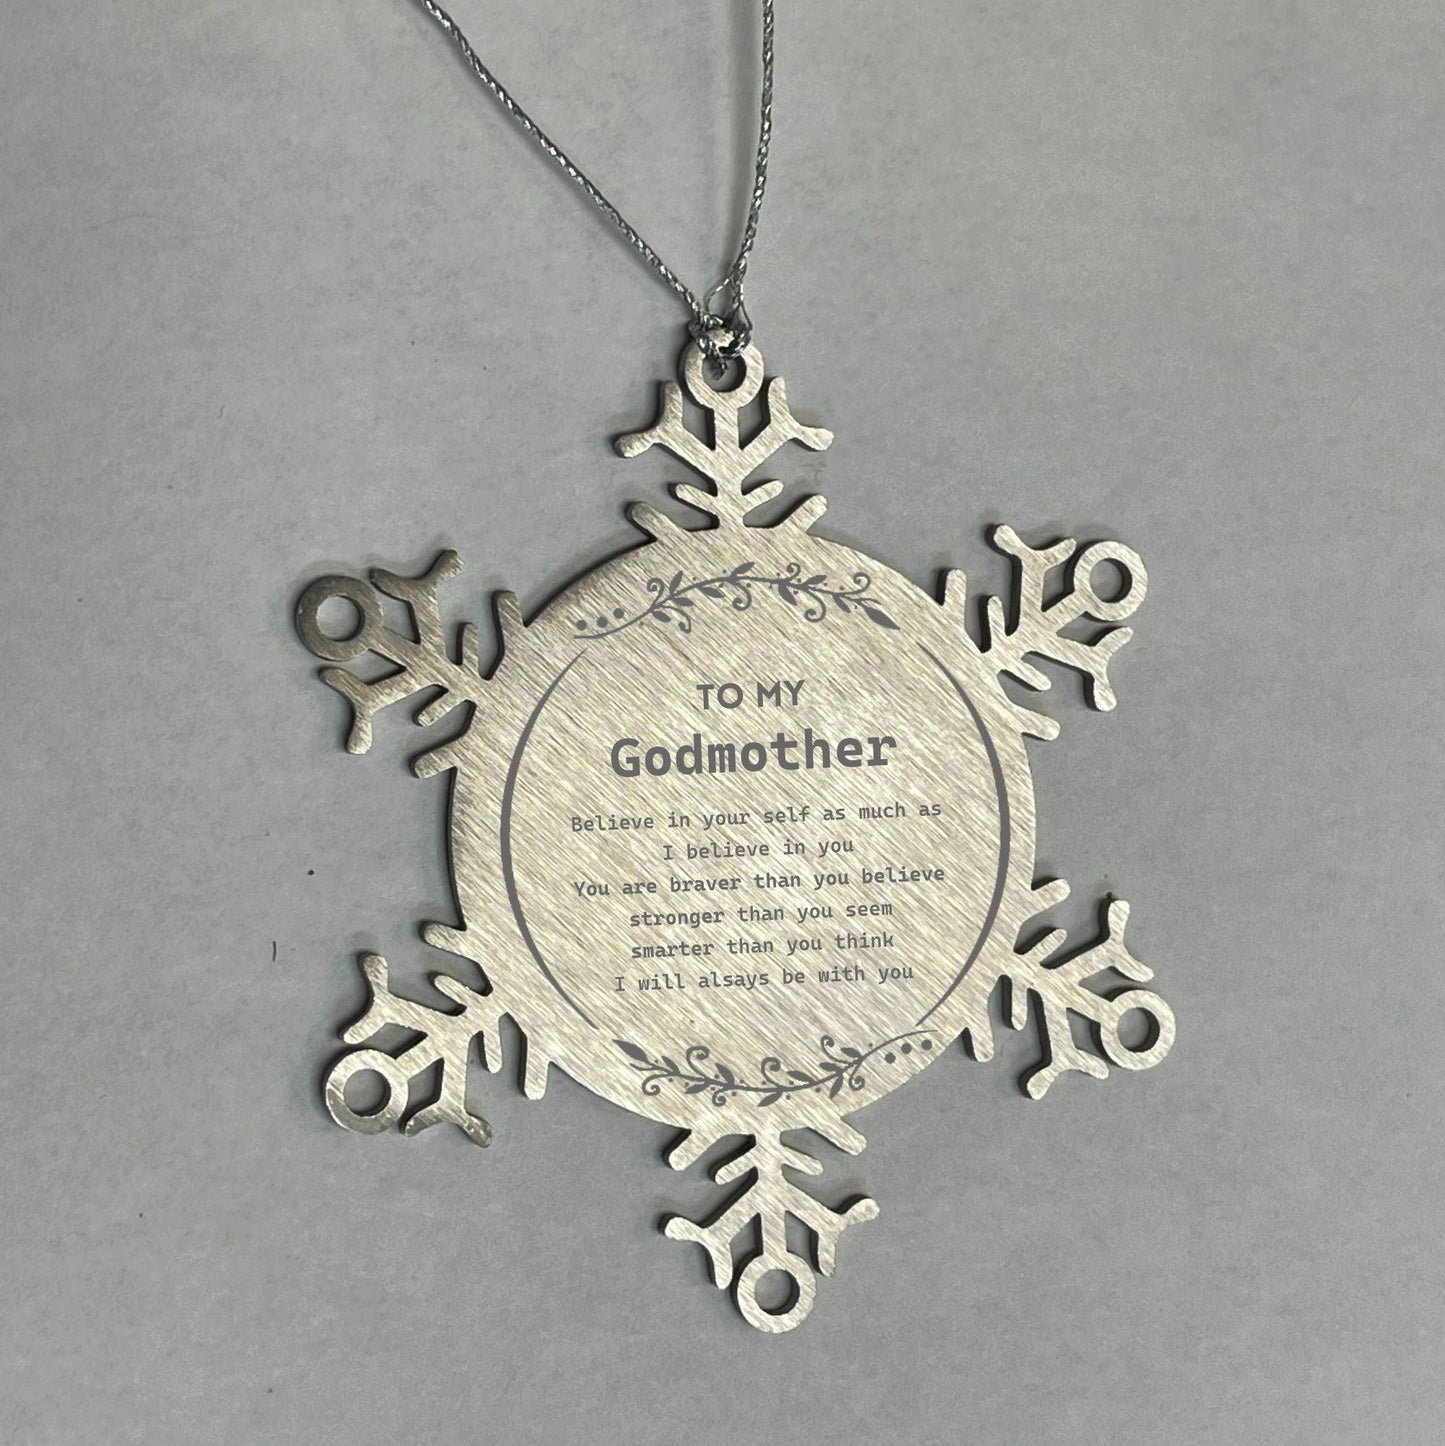 Godmother Snowflake Ornament Gifts, To My Godmother You are braver than you believe, stronger than you seem, Inspirational Gifts For Godmother Ornament, Birthday, Christmas Gifts For Godmother Men Women